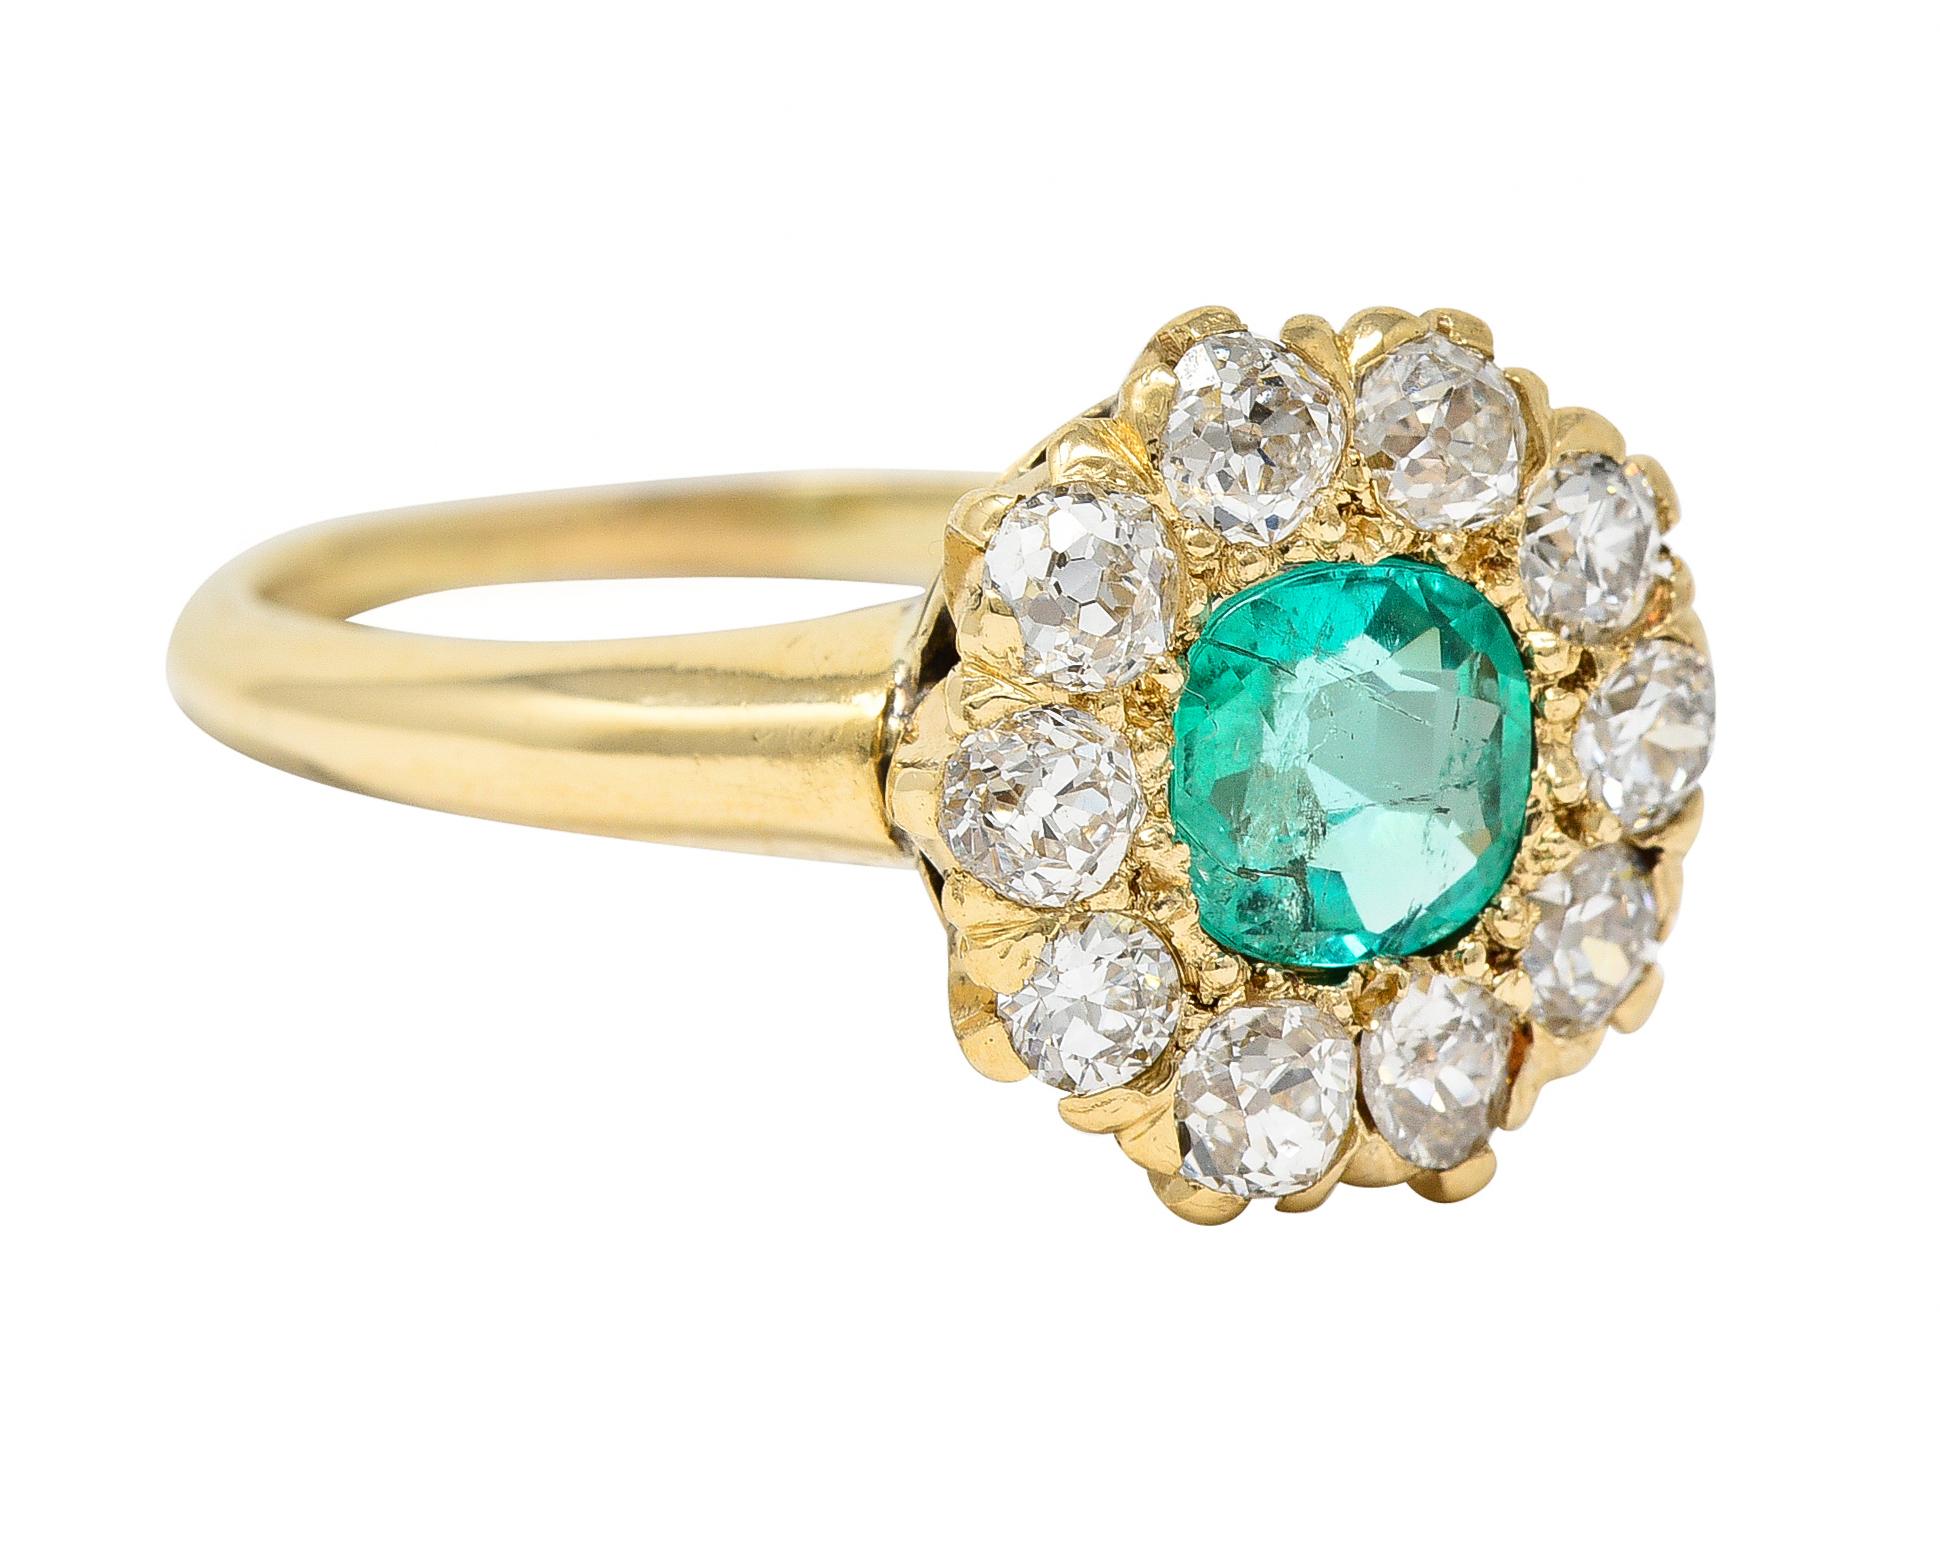 Centering a cushion cut emerald weighing approximately 0.52 carat - transparent light green. Flush set with a halo surround of old mine cut diamonds weighing approximately 1.00 carat total. G/H color with I clarity - prong set and flanked by rounded